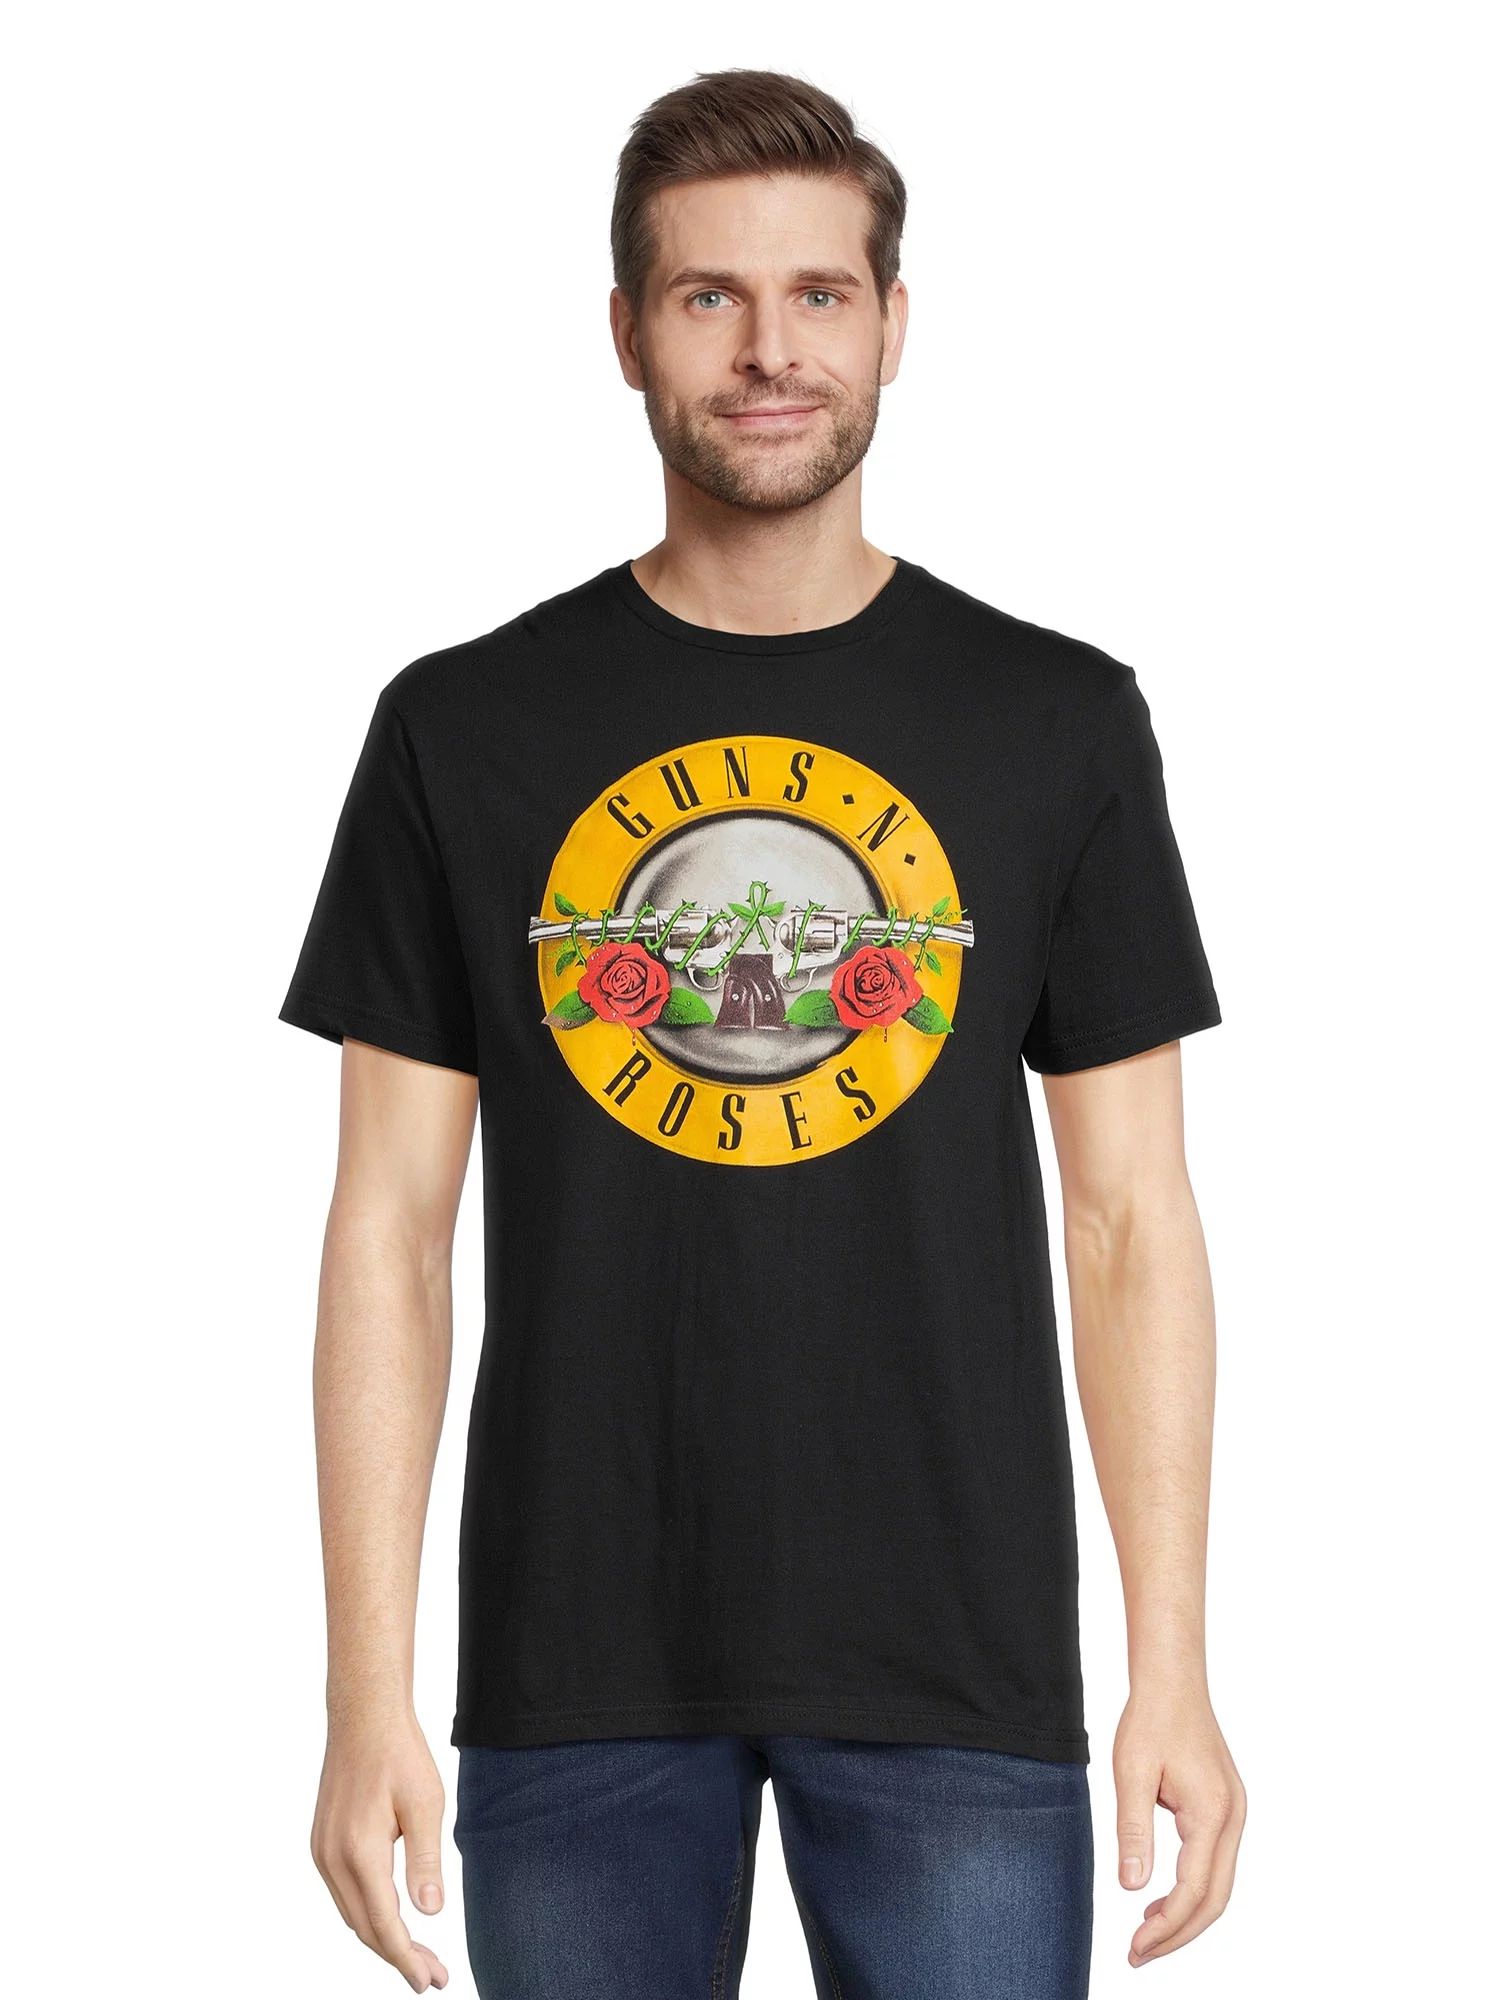 Guns N' Roses Icon Men's & Big Men's Graphic Tee with Short Sleeves, S-3XL | Walmart (US)